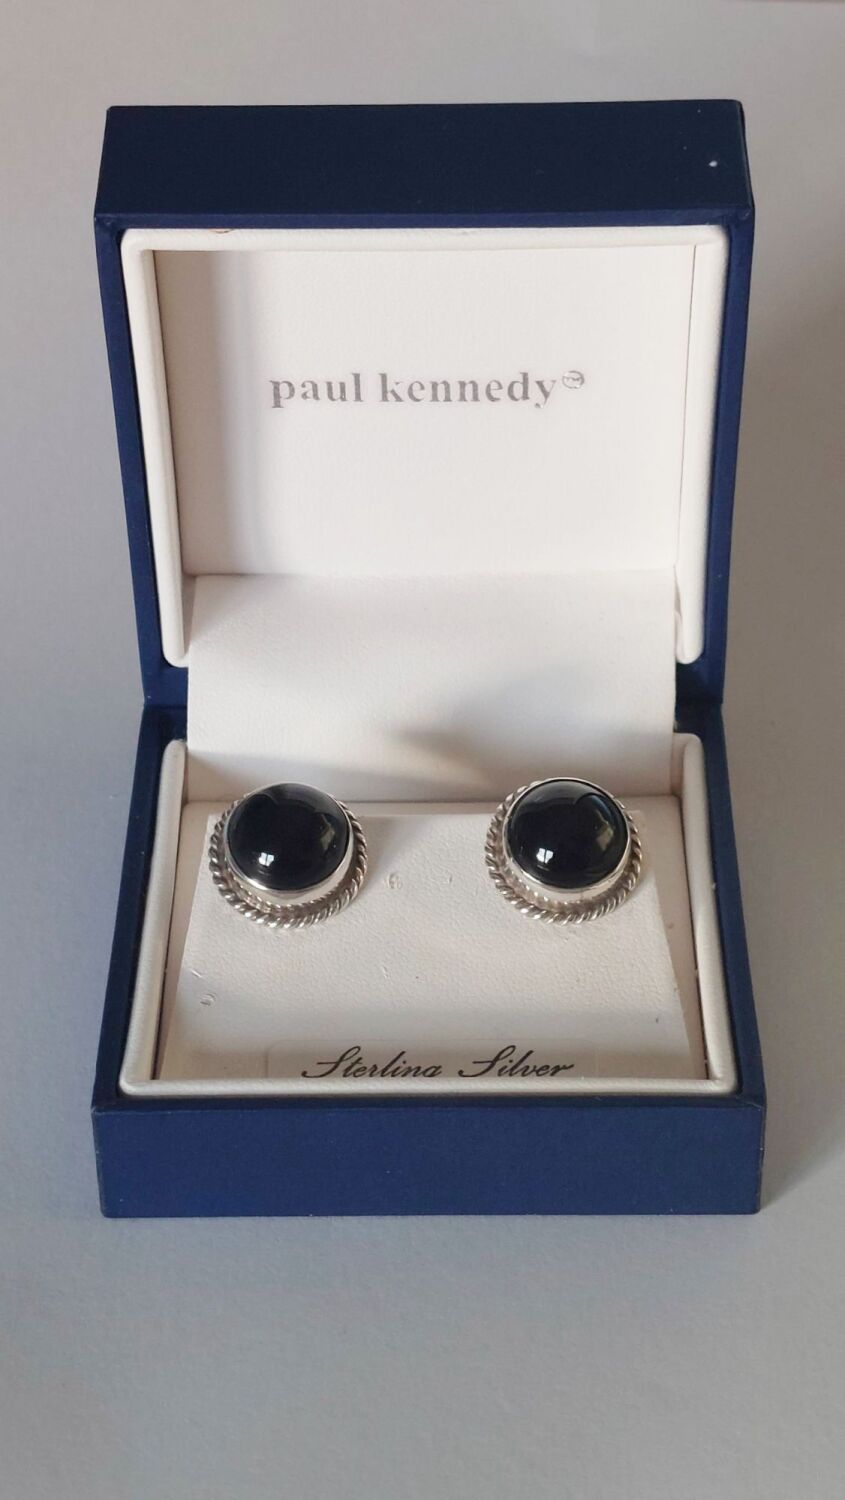 Paul Kennedy Earrings-Sterling Silver Studs With Onyx Cabochons - For Pierc